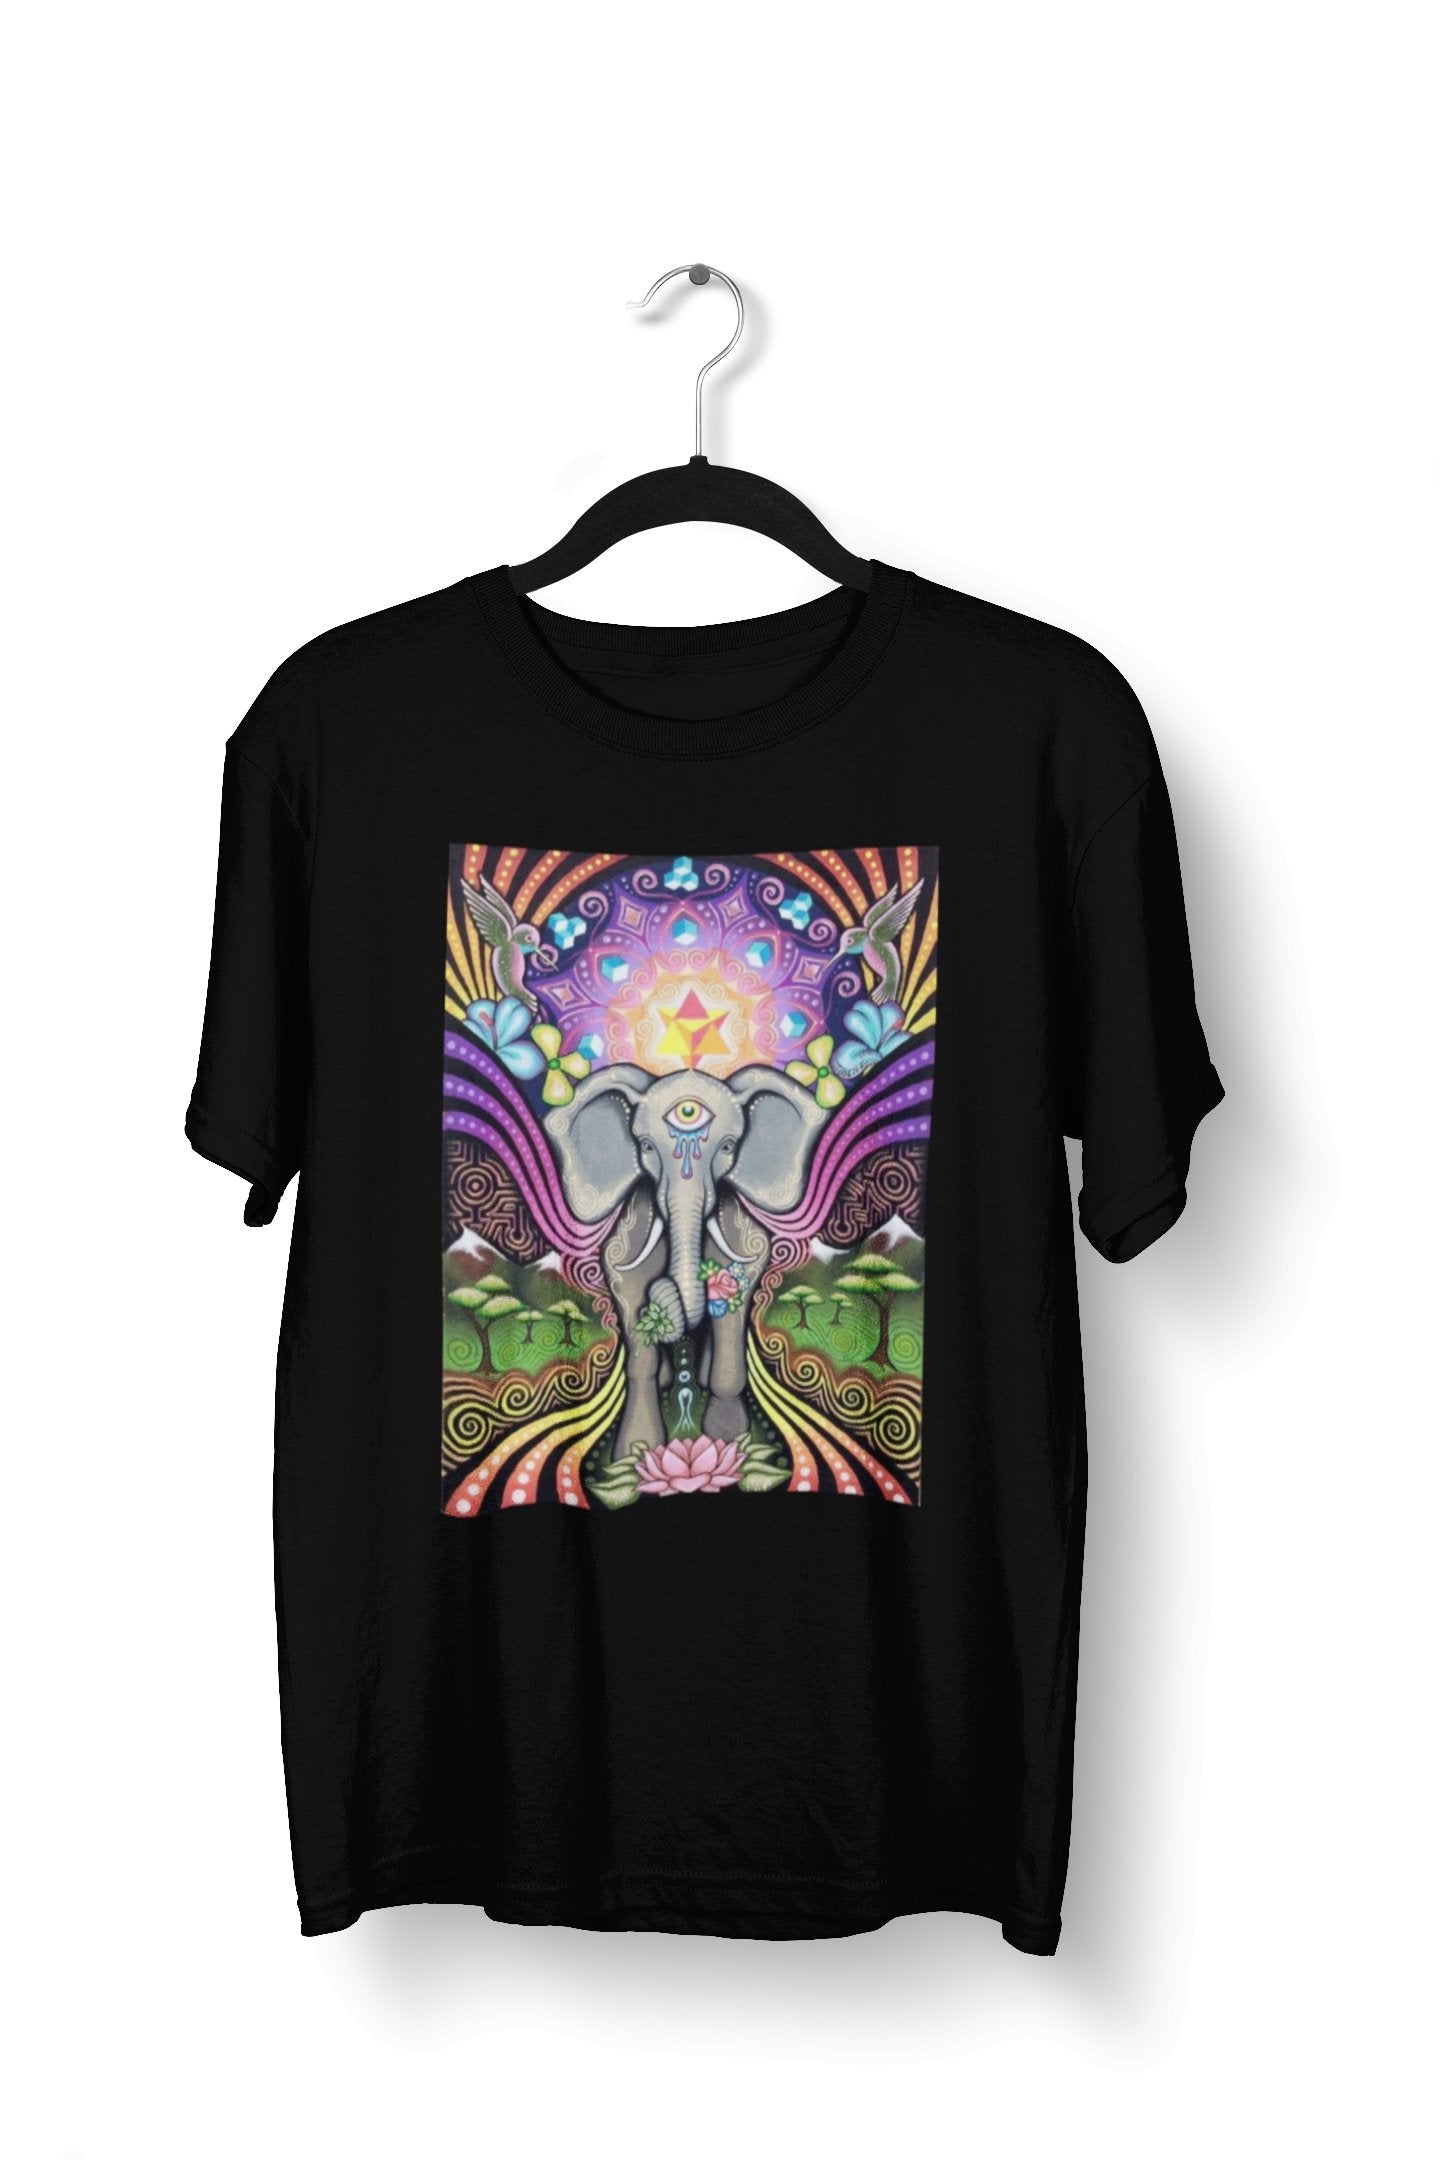 thelegalgang,Psychedelic Third Eye Elephant Graphic Art T-Shirt for Men,.